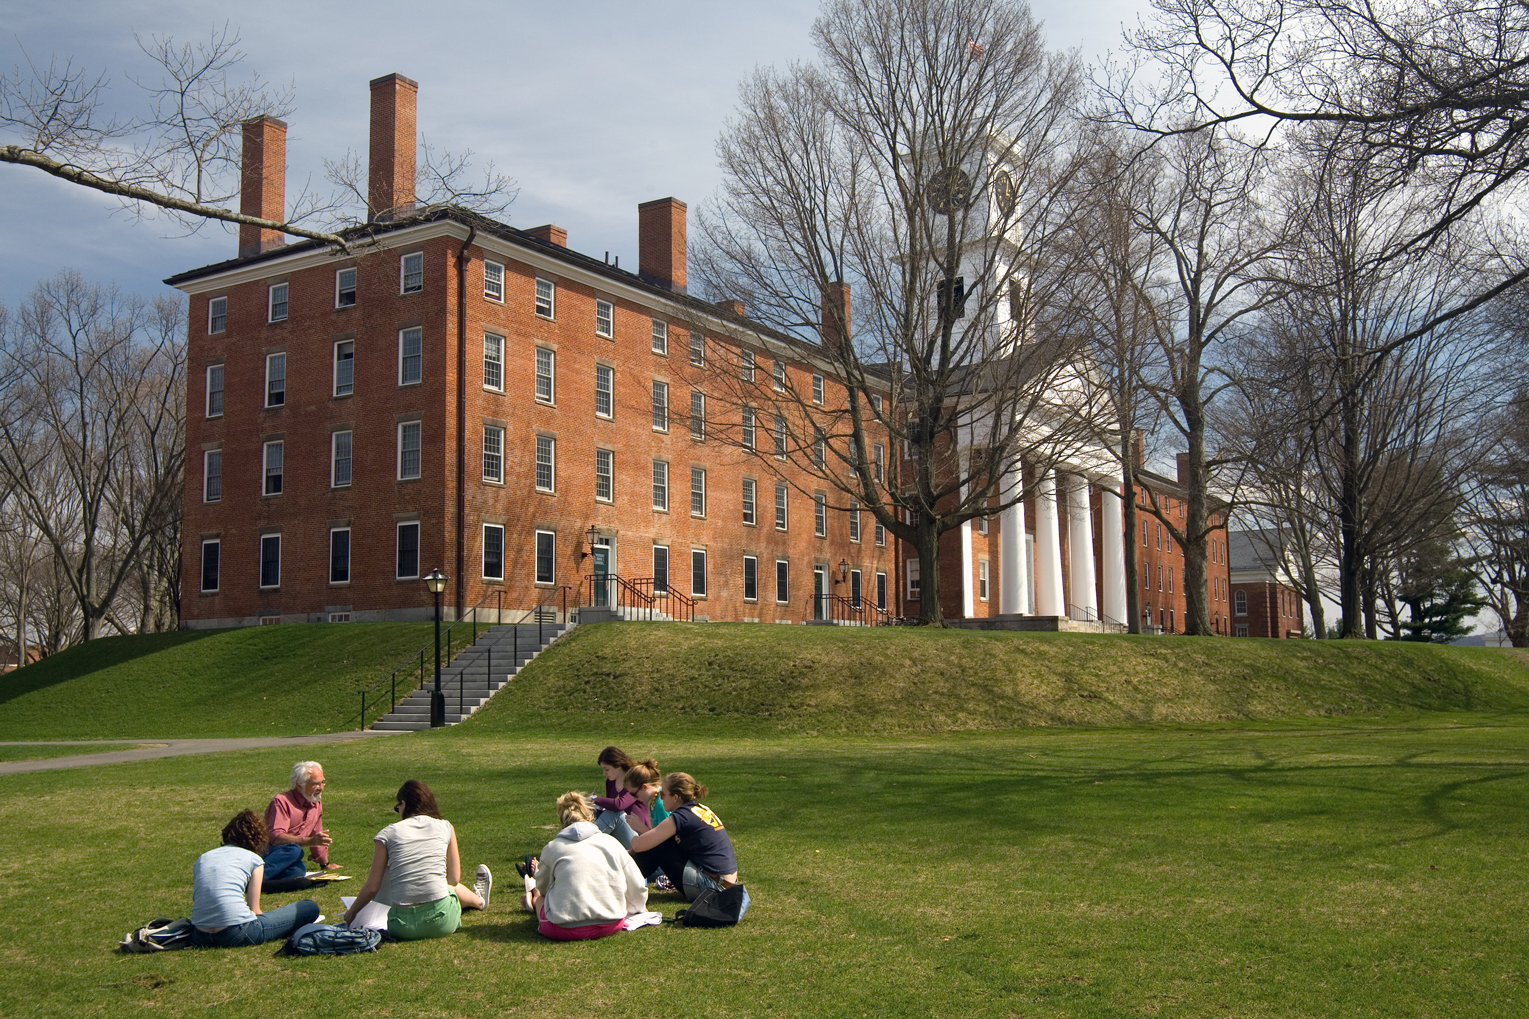 Students gathered on the lawn at Amherst College campus